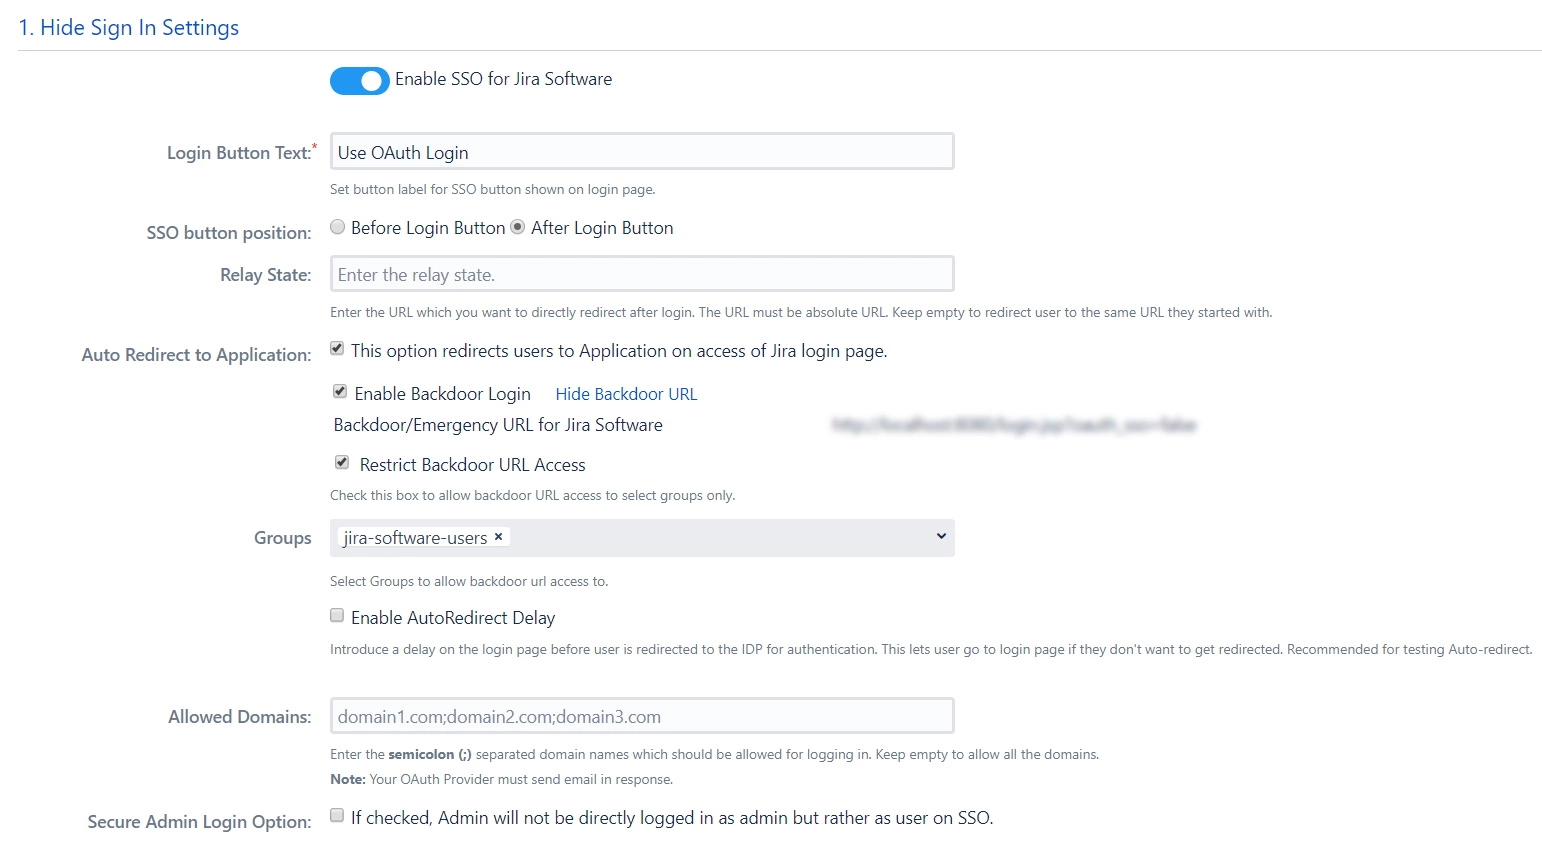 OAuth / OpenID Single Sign On (SSO) into Jira , Sign In Settings